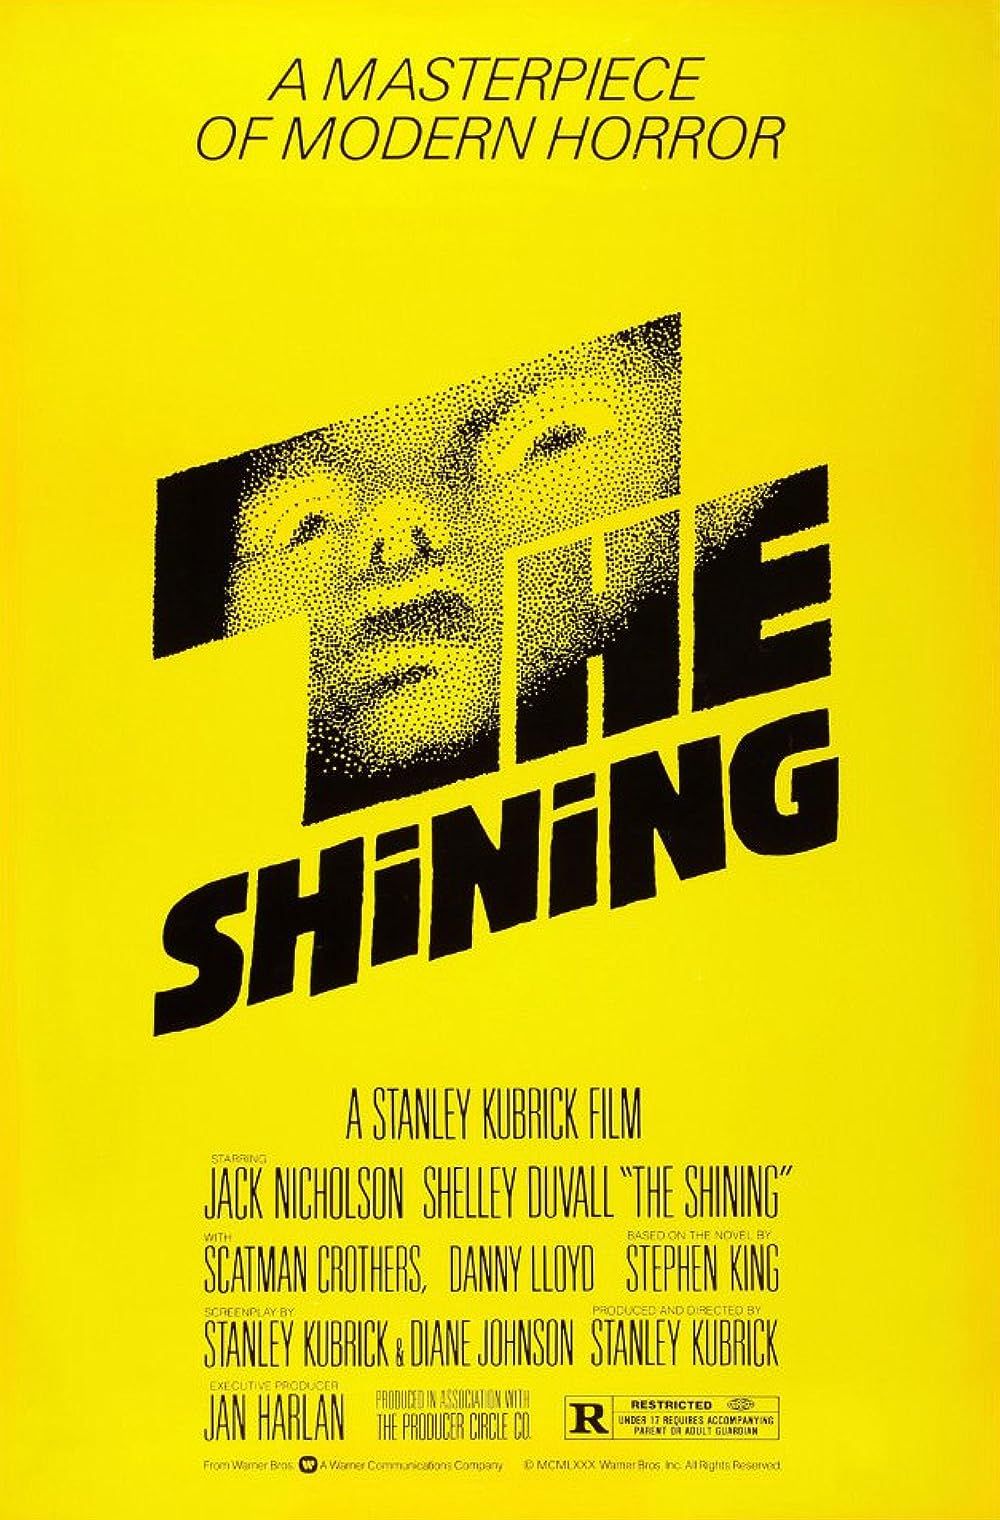 A yellow poster for The Shining